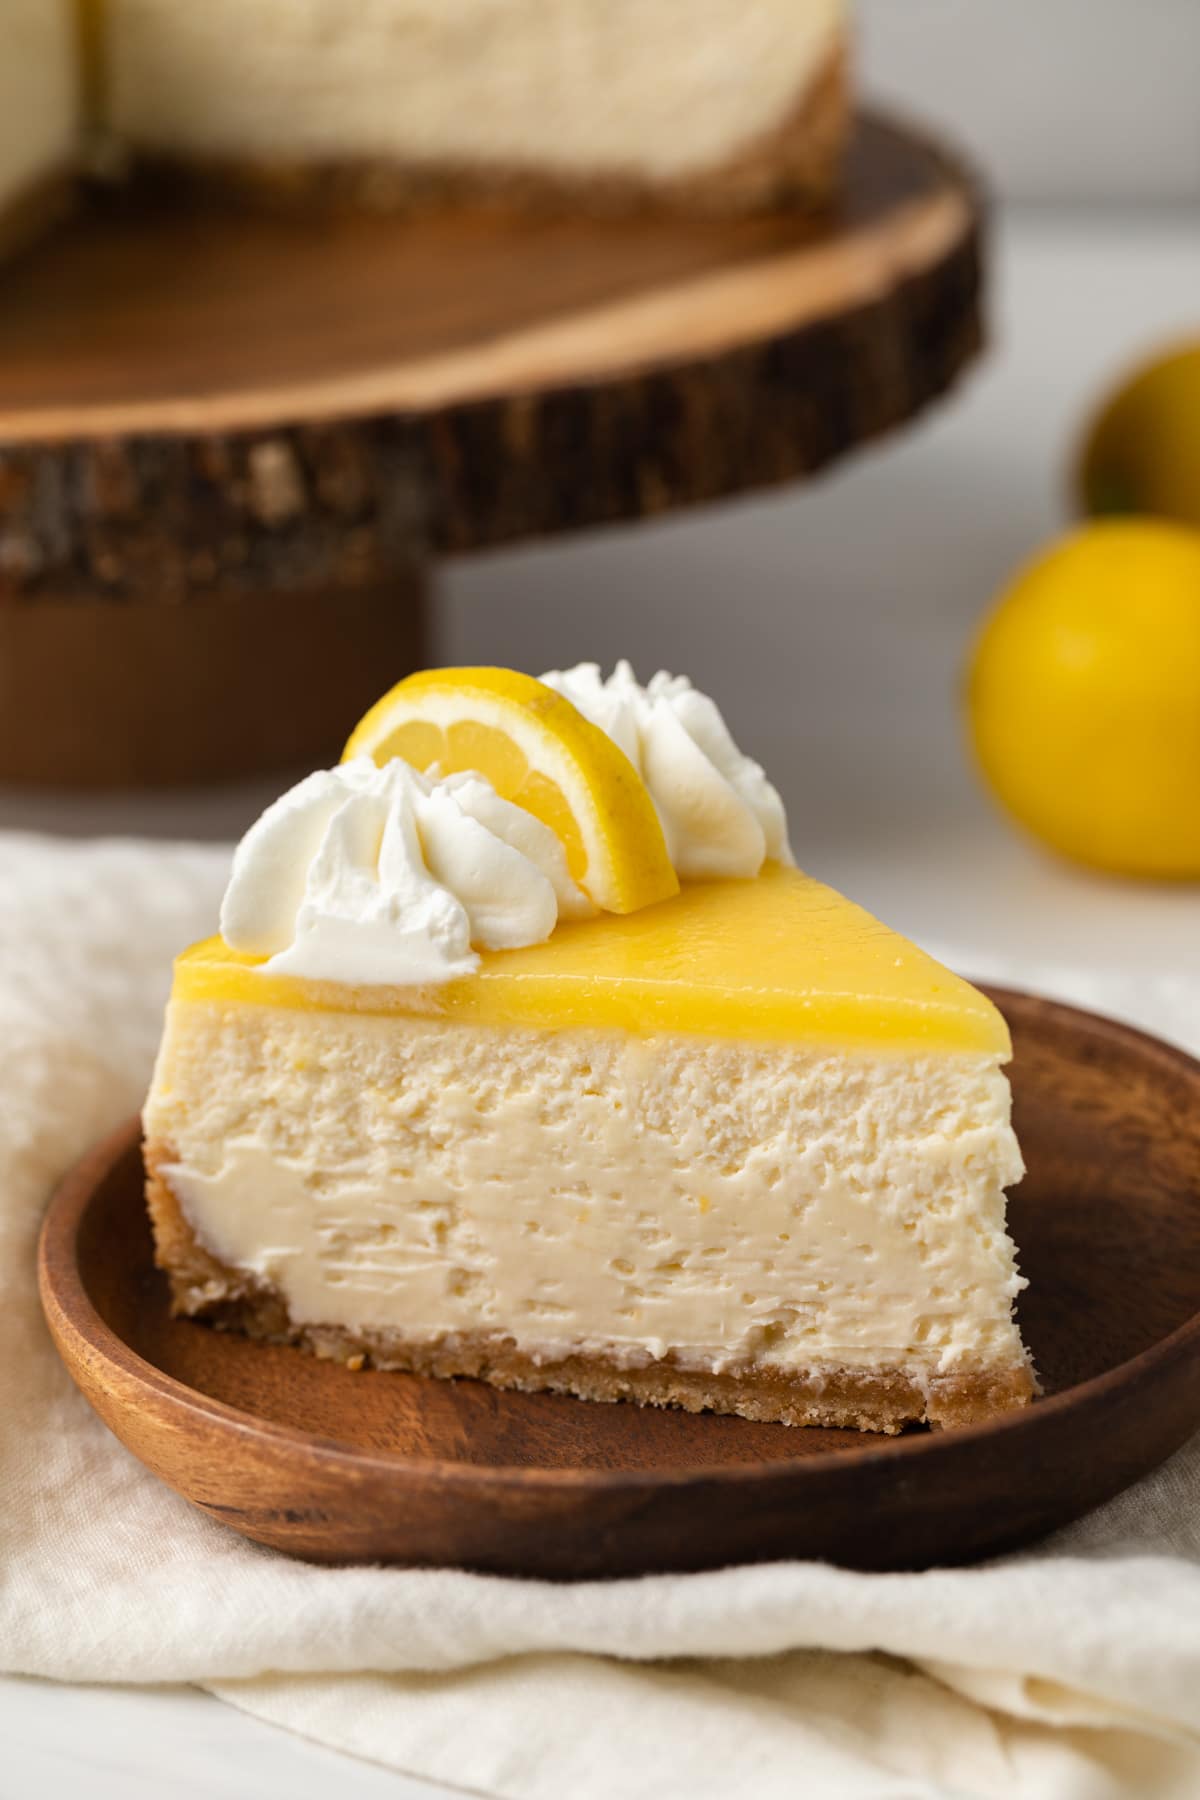 Side view of lemon cheesecake slice on wooden plate.